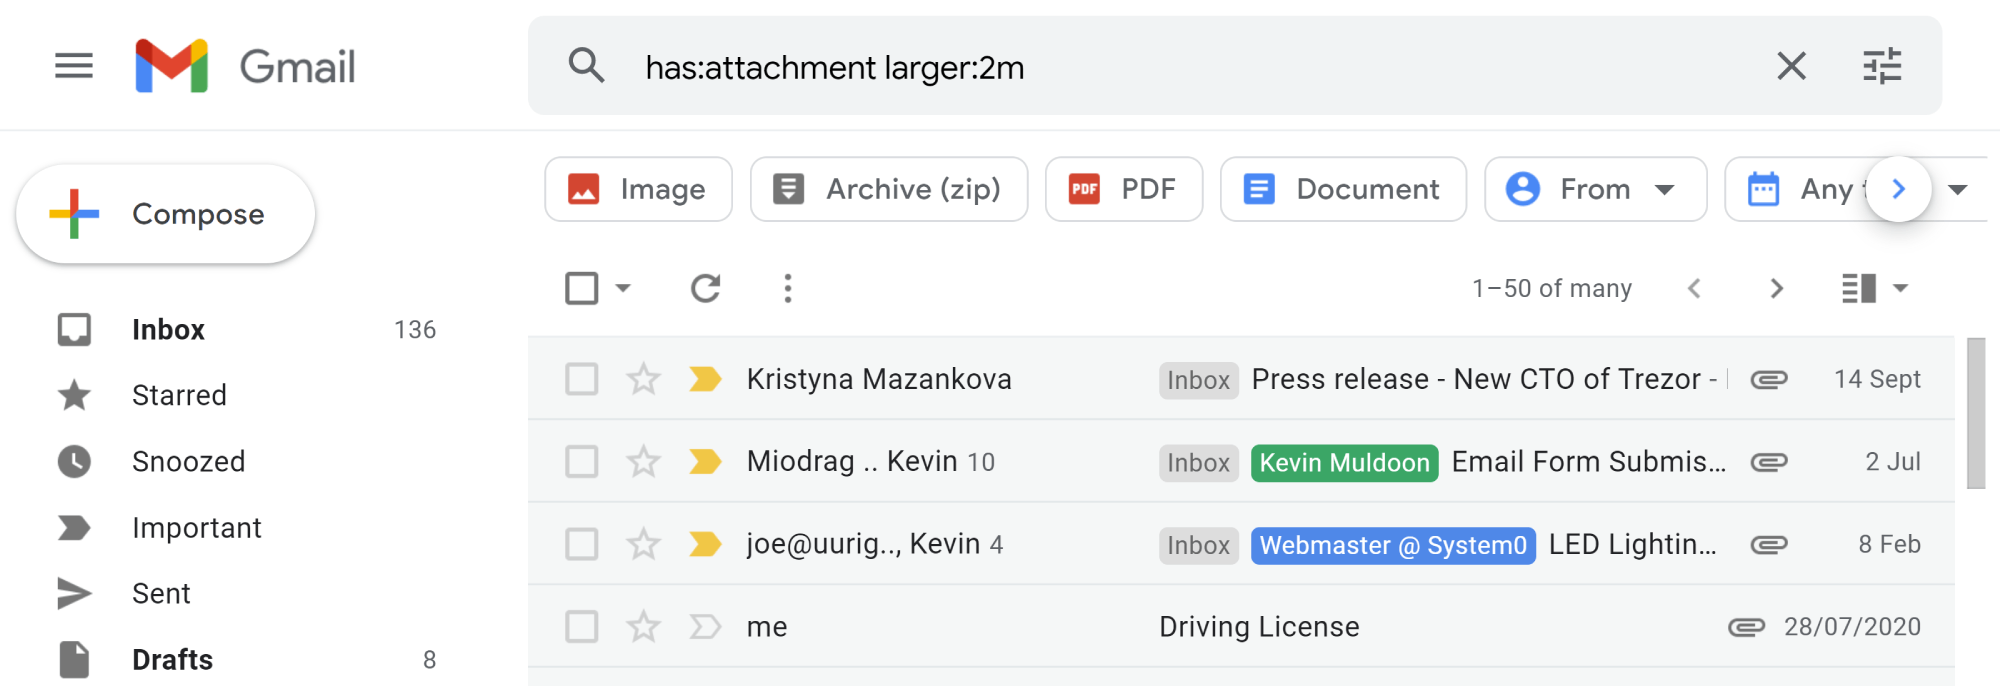 Gmail Emails with Attachments